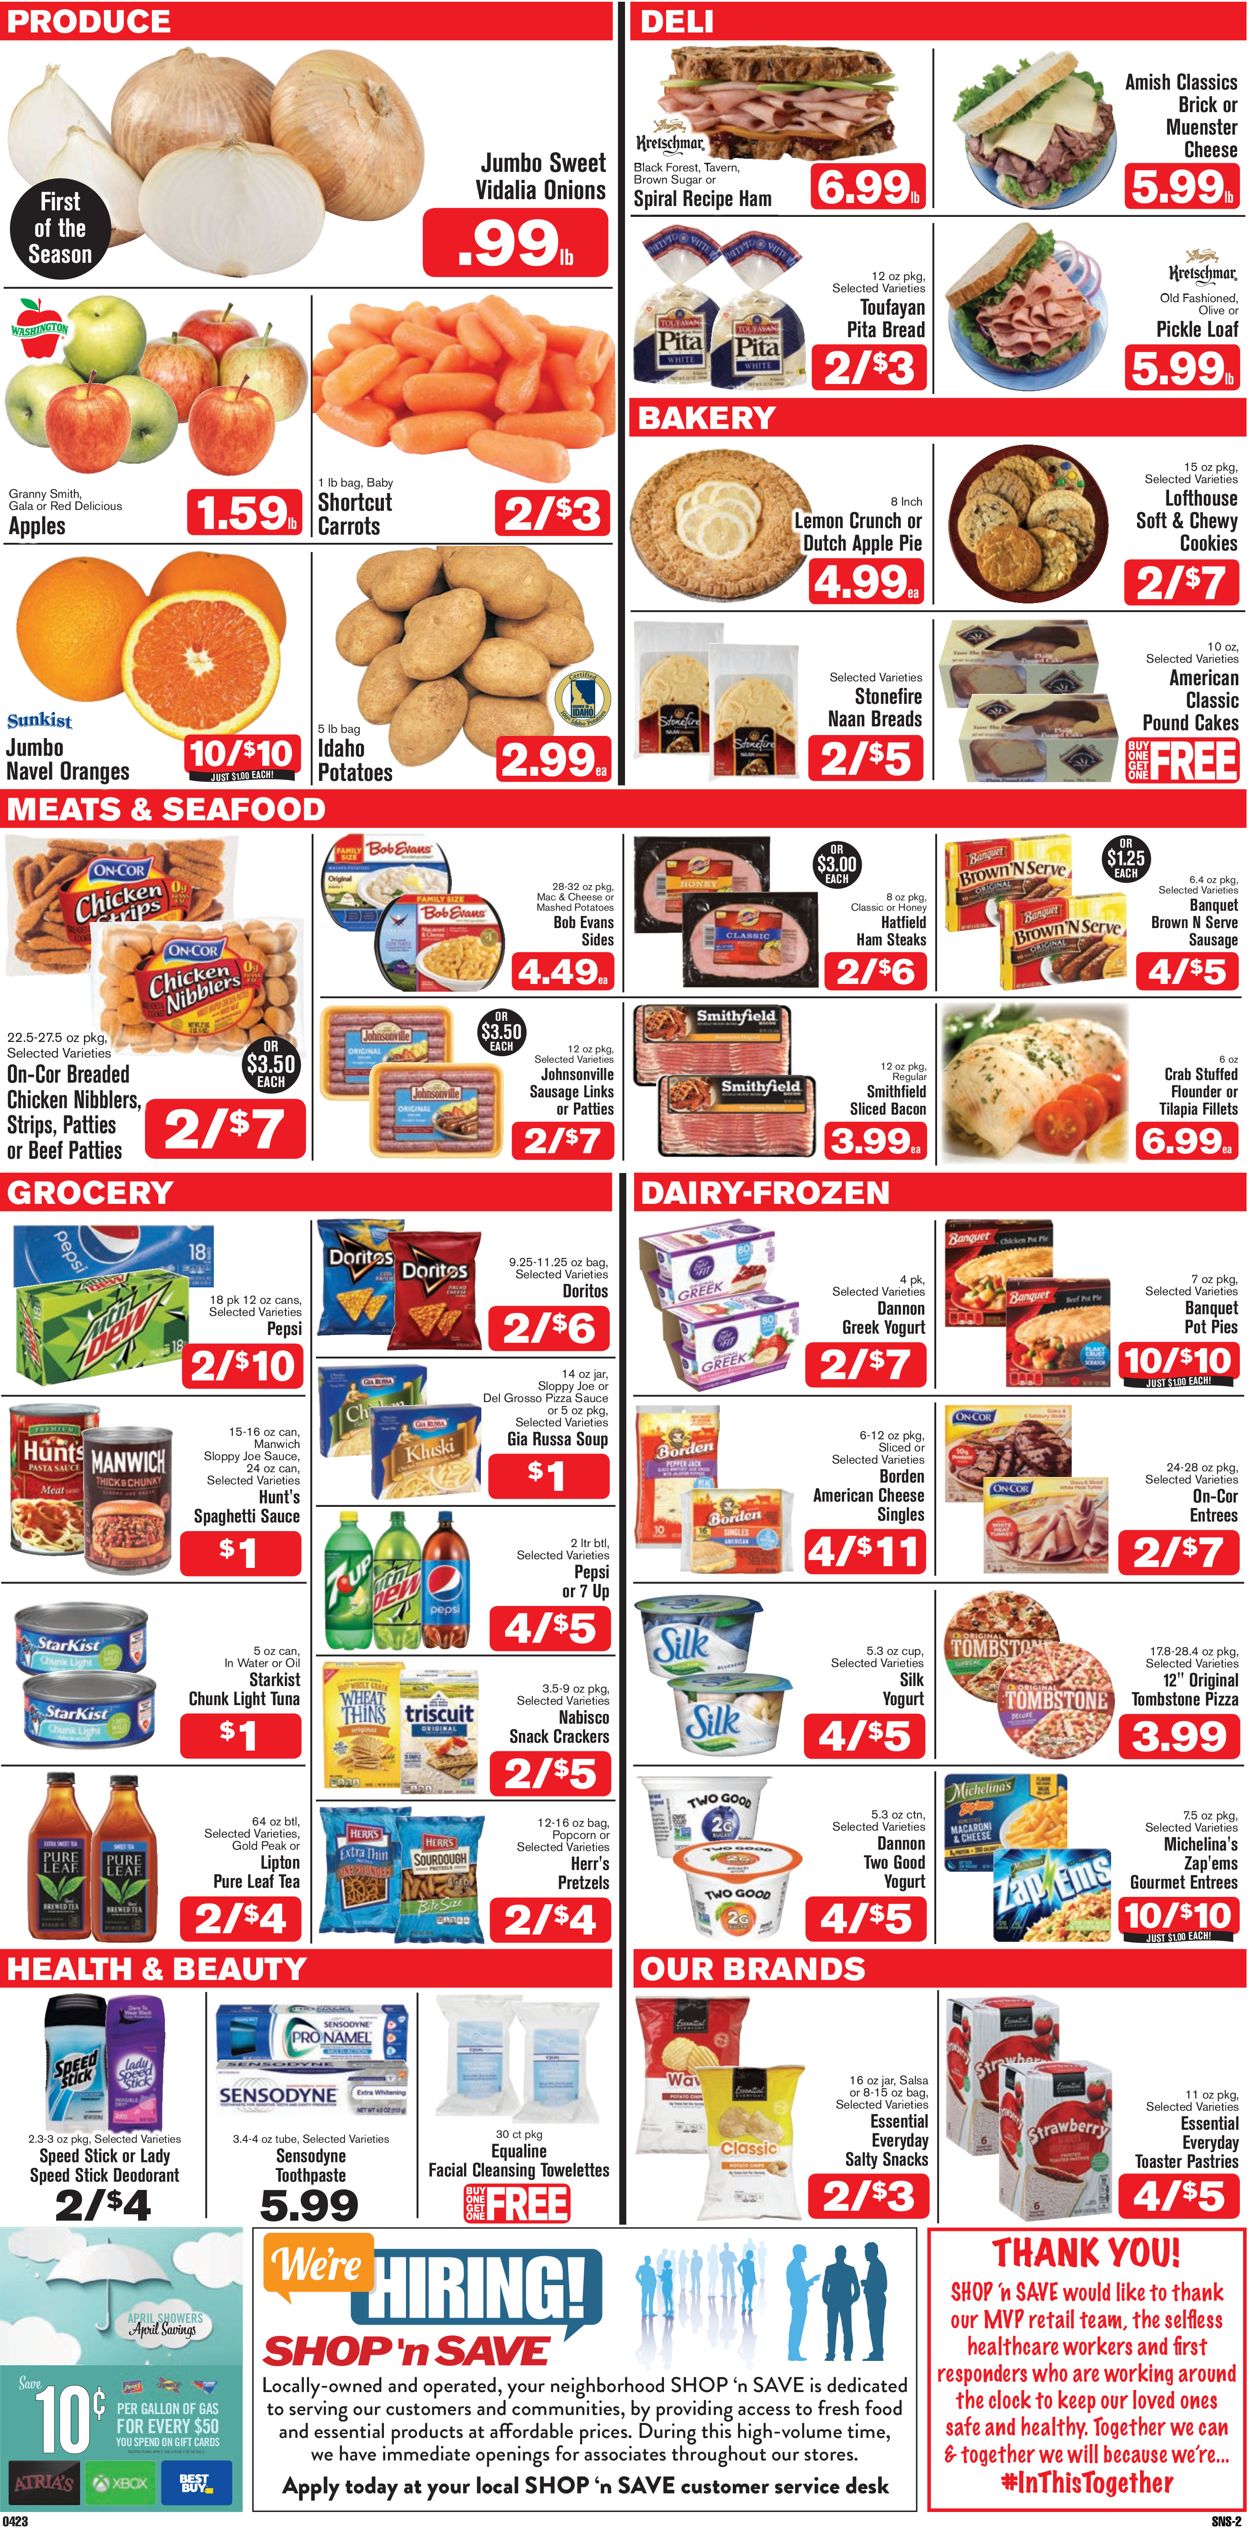 Shop ‘n Save Current weekly ad 04/23 - 04/29/2020 [2] - frequent-ads.com